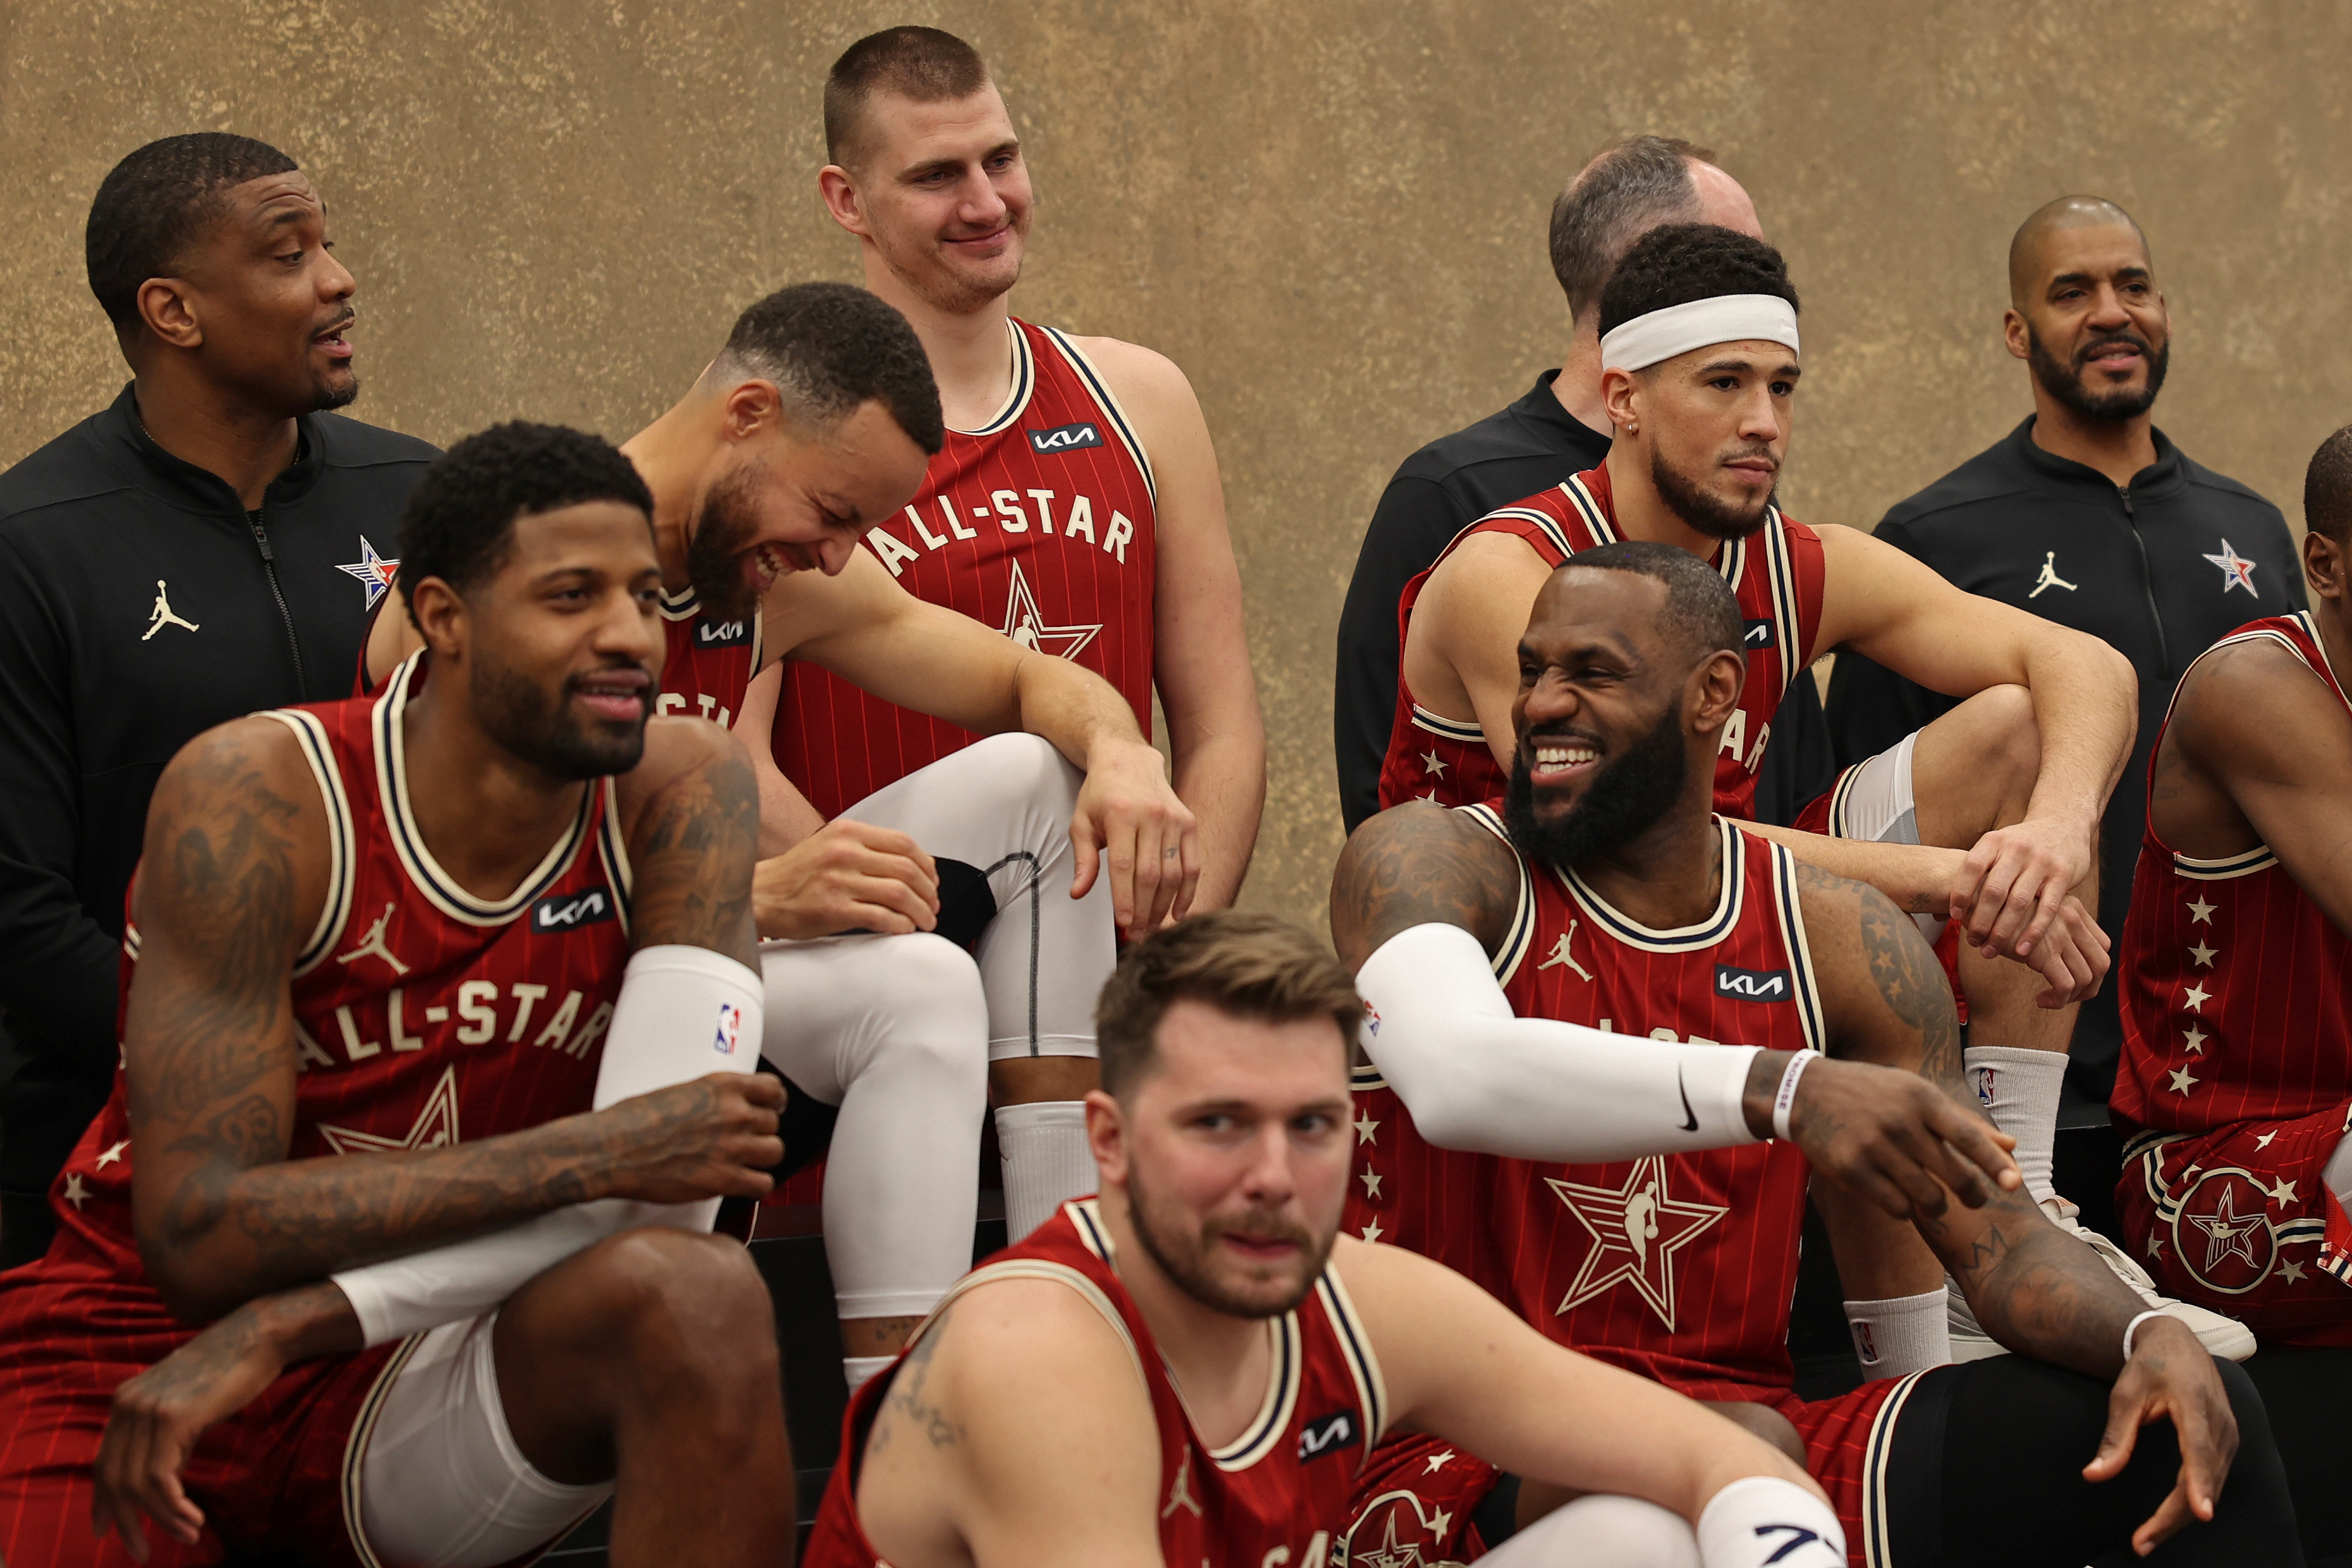 Professional basketball players in All-Star jerseys sitting and chatting